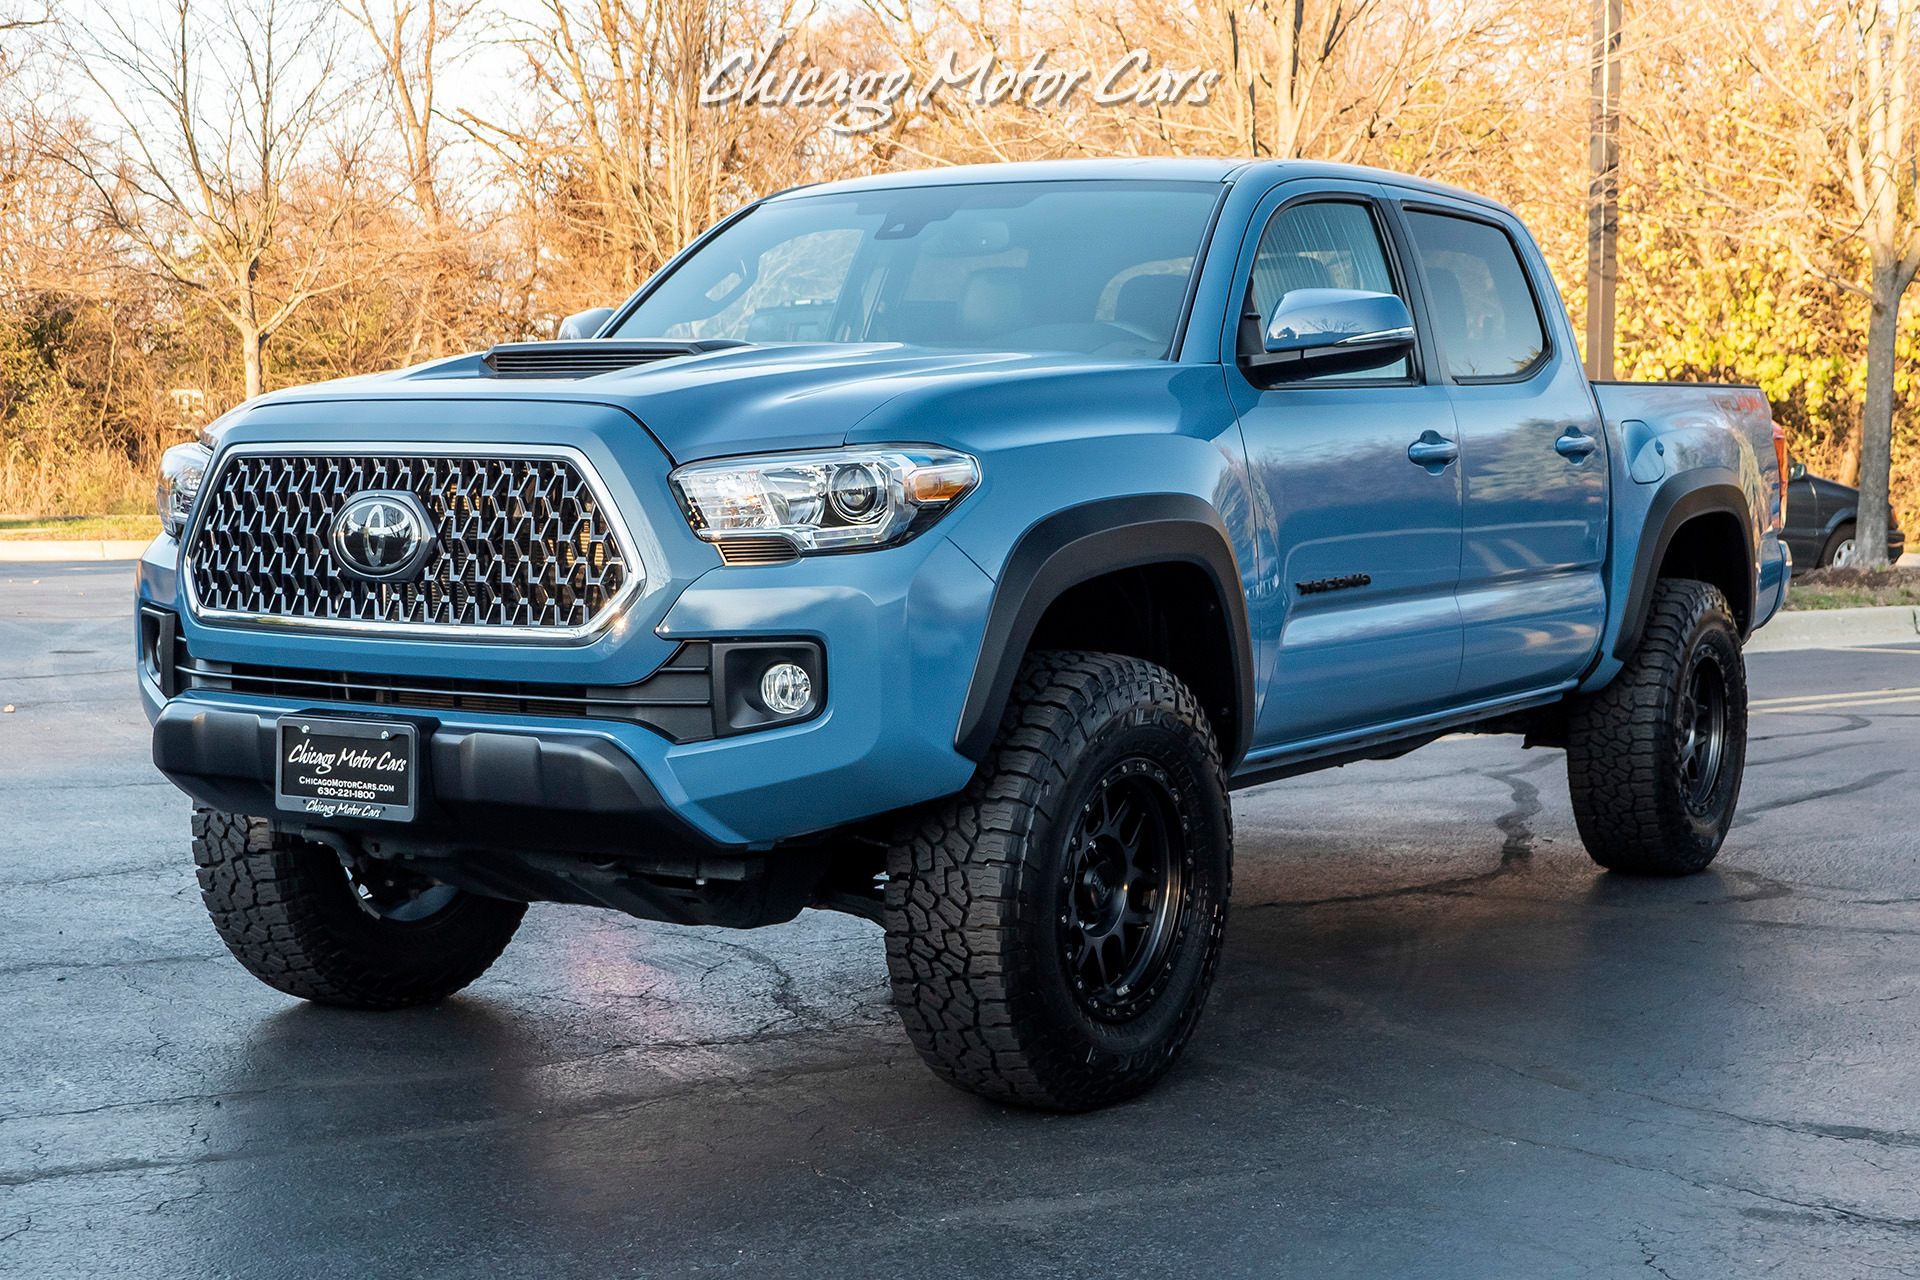 Used 2019 Toyota TRD OffRoad 4x4 Lifted with Upgraded Tires